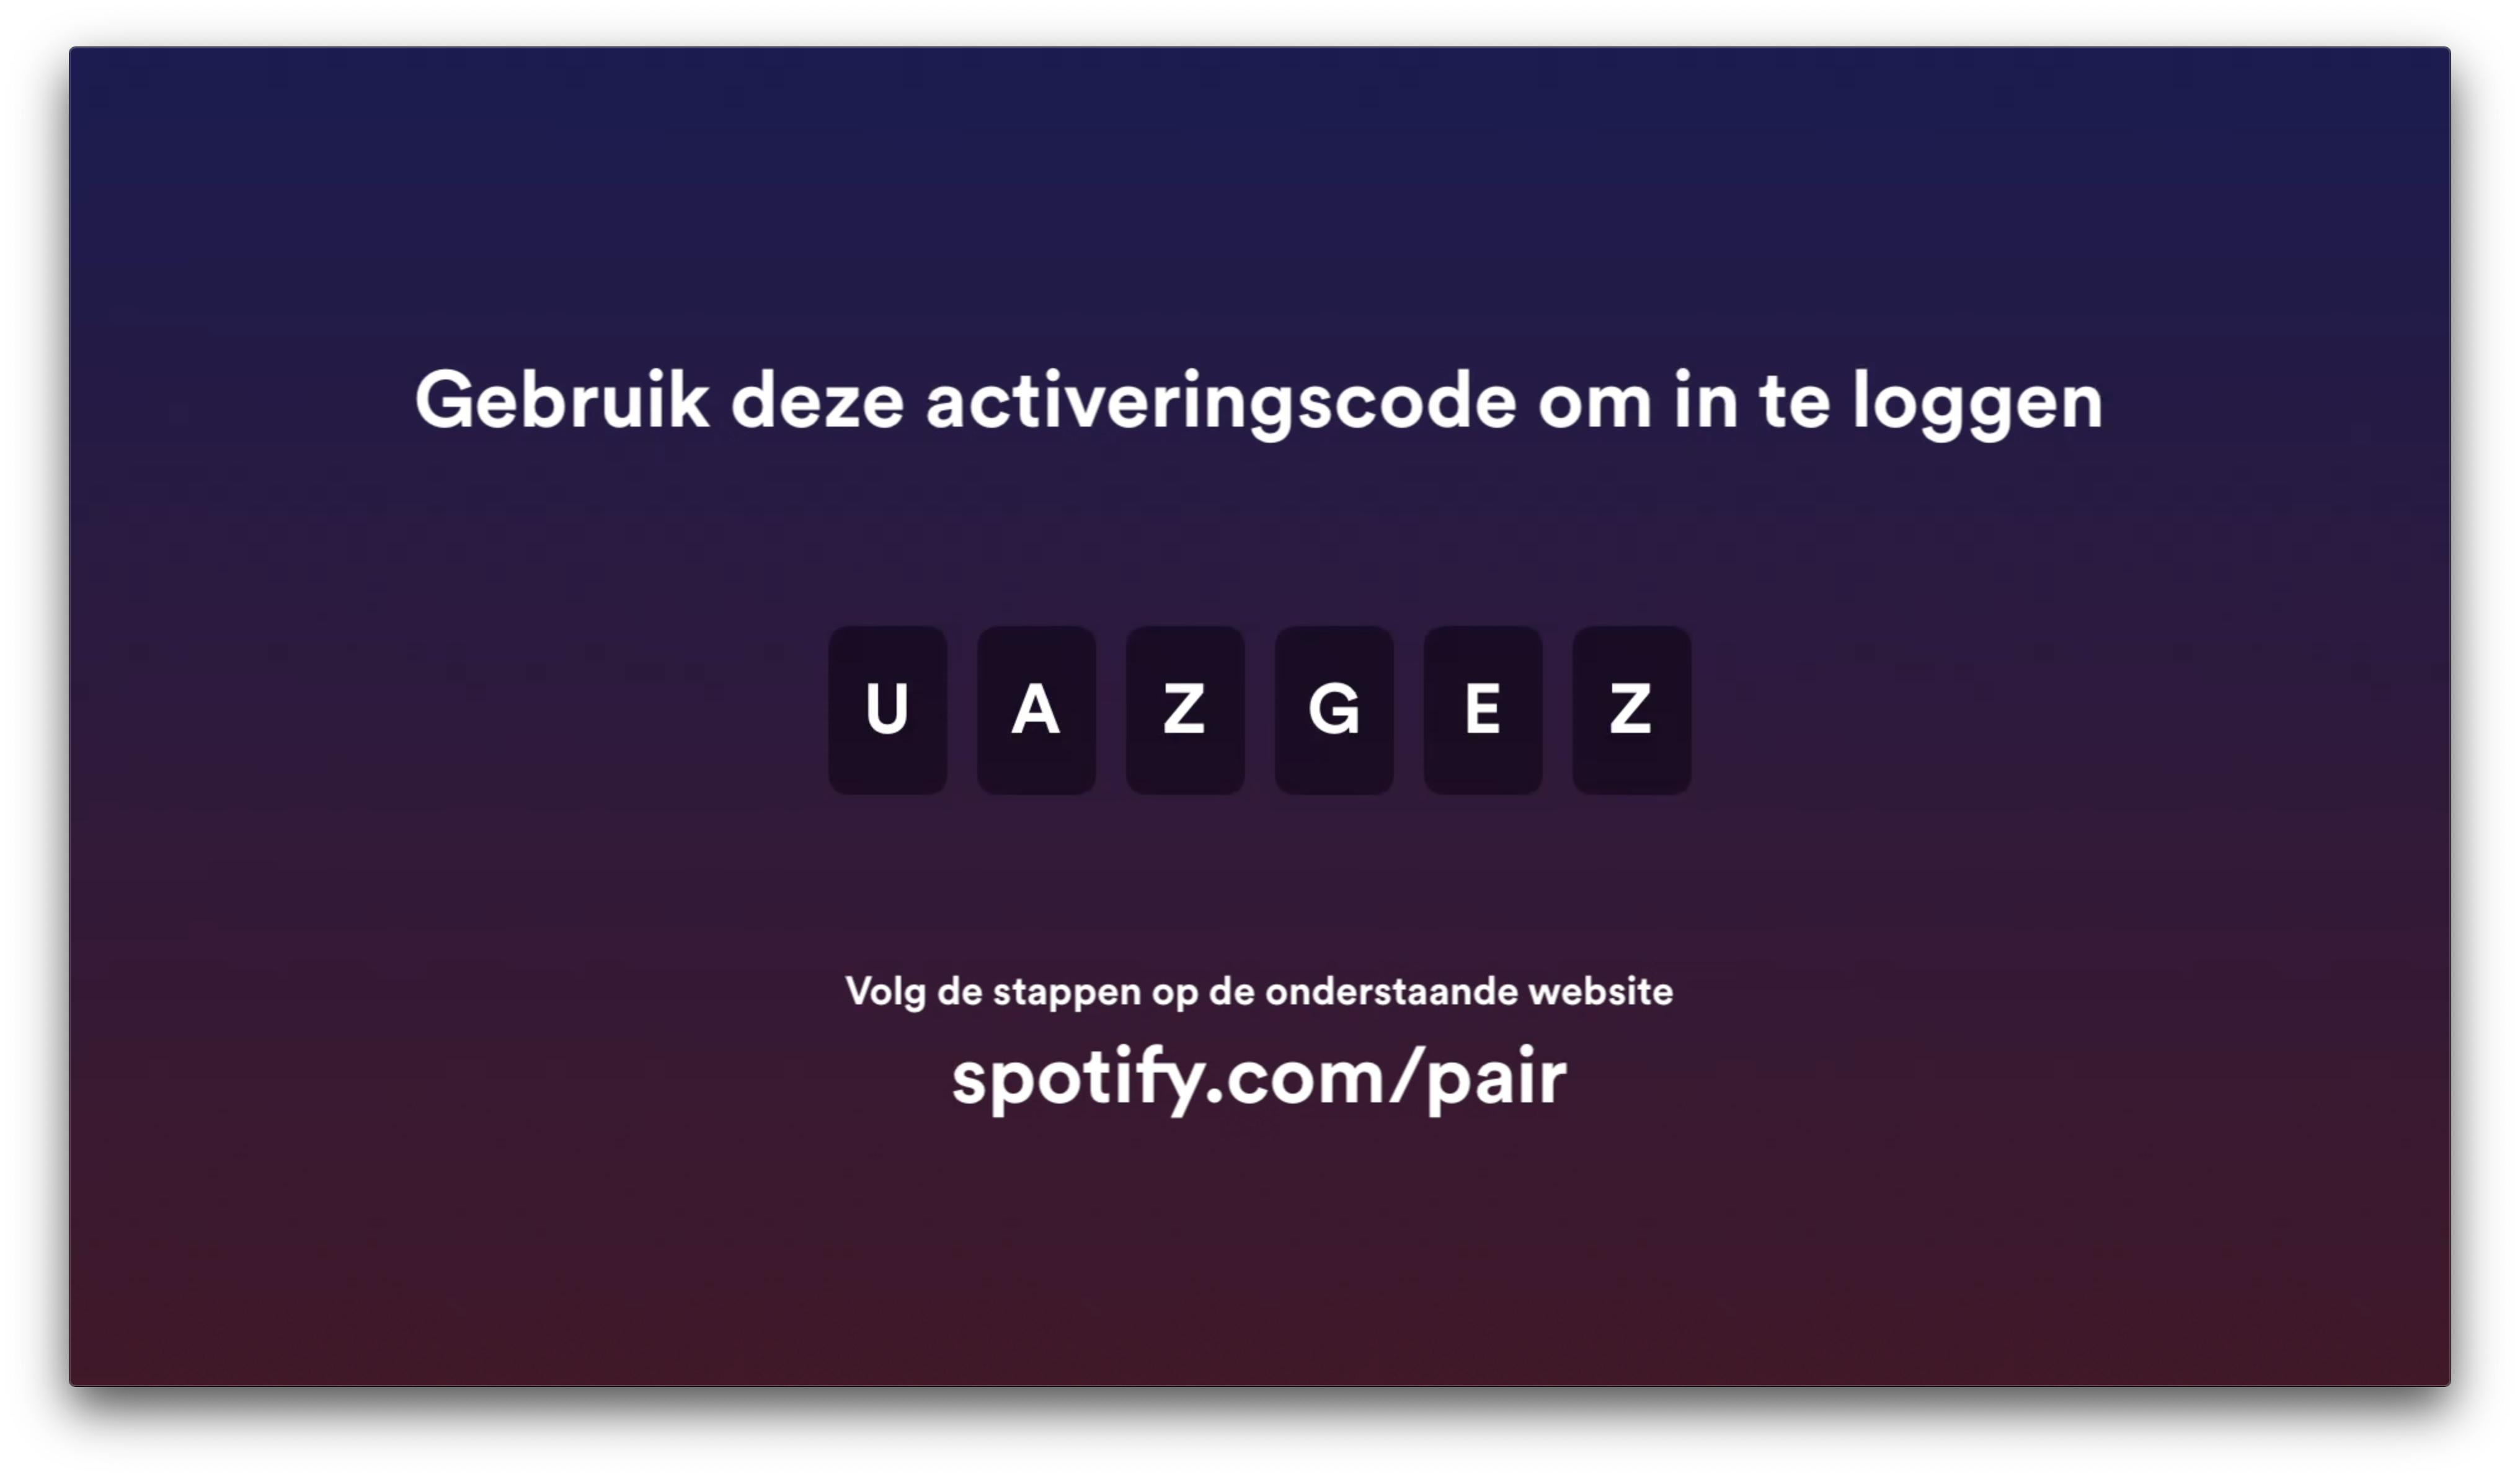 Spotify's pairing screen, asking the user to 'use this activation code to login' with a browser (in Dutch)